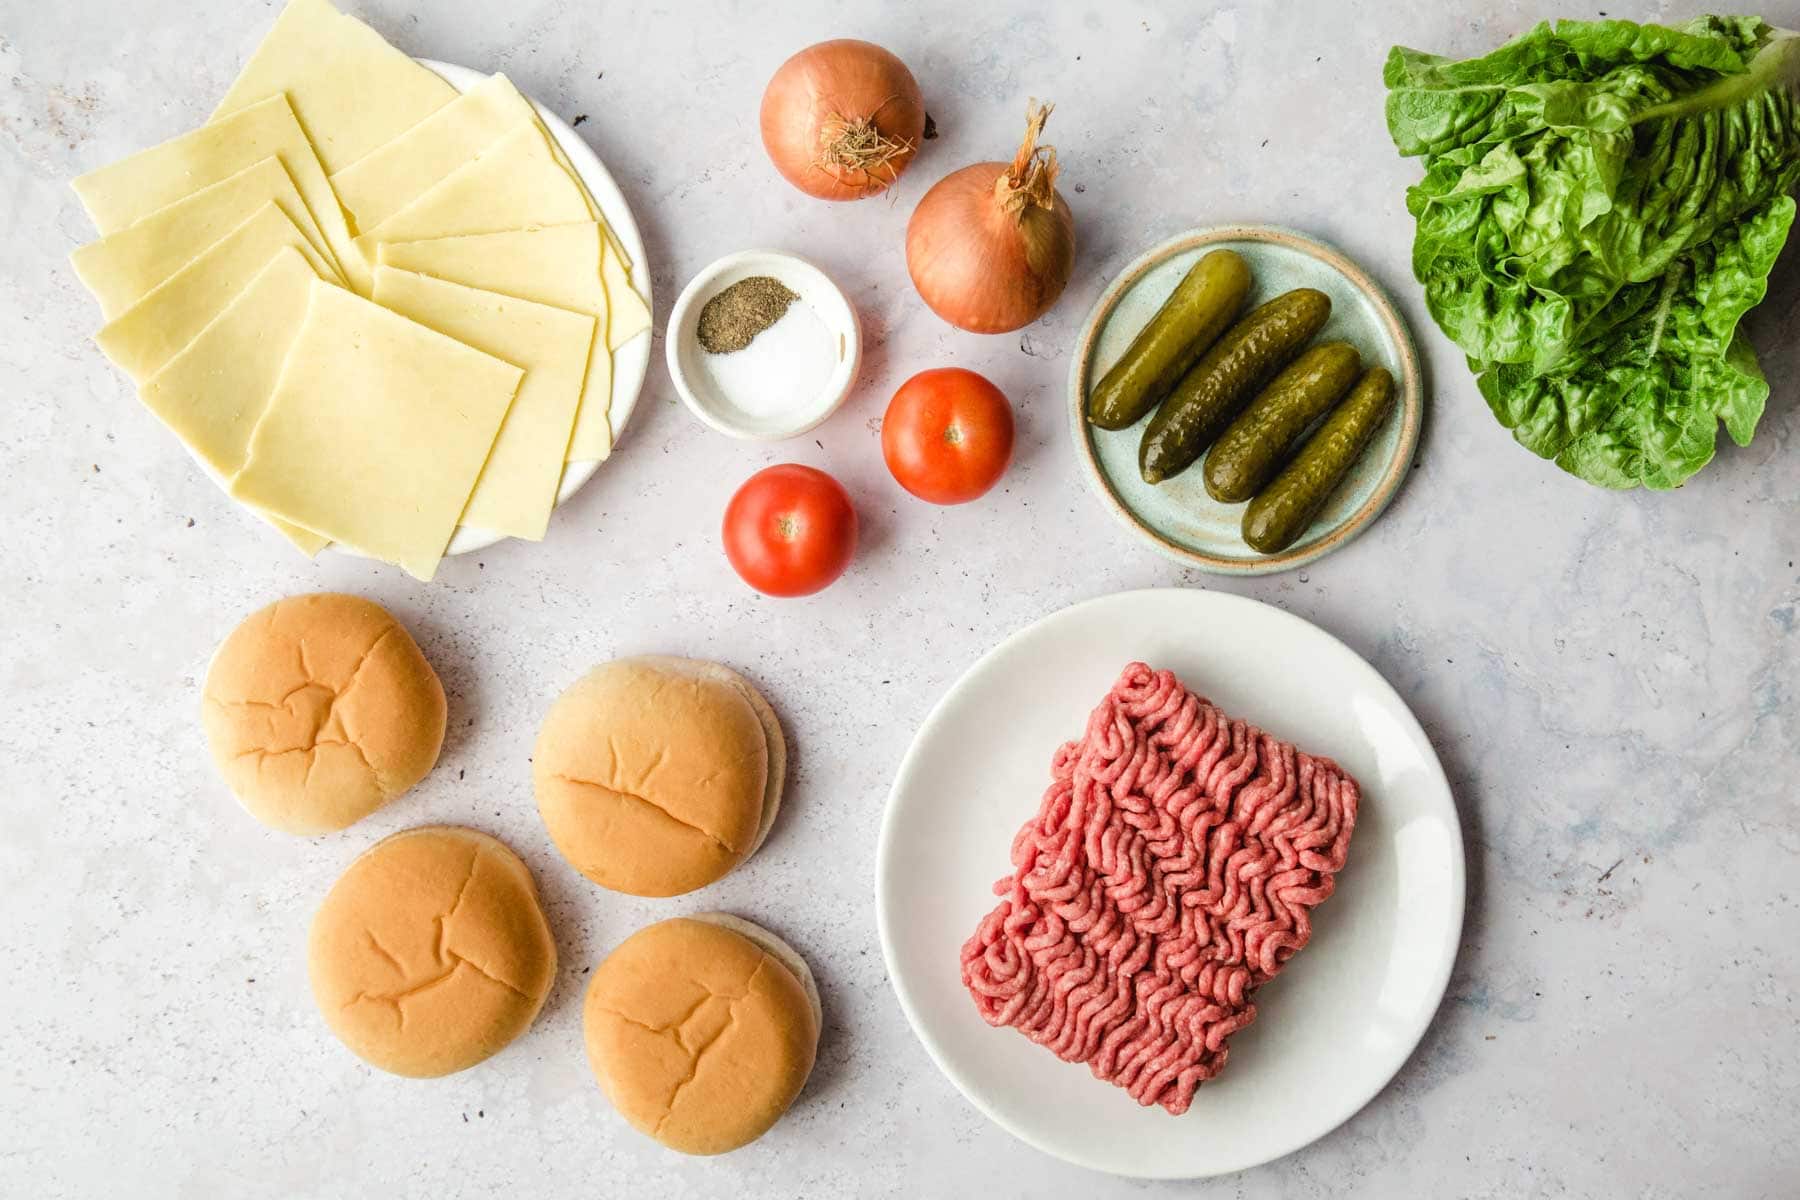 How to Make Hamburgers in the Instant Pot